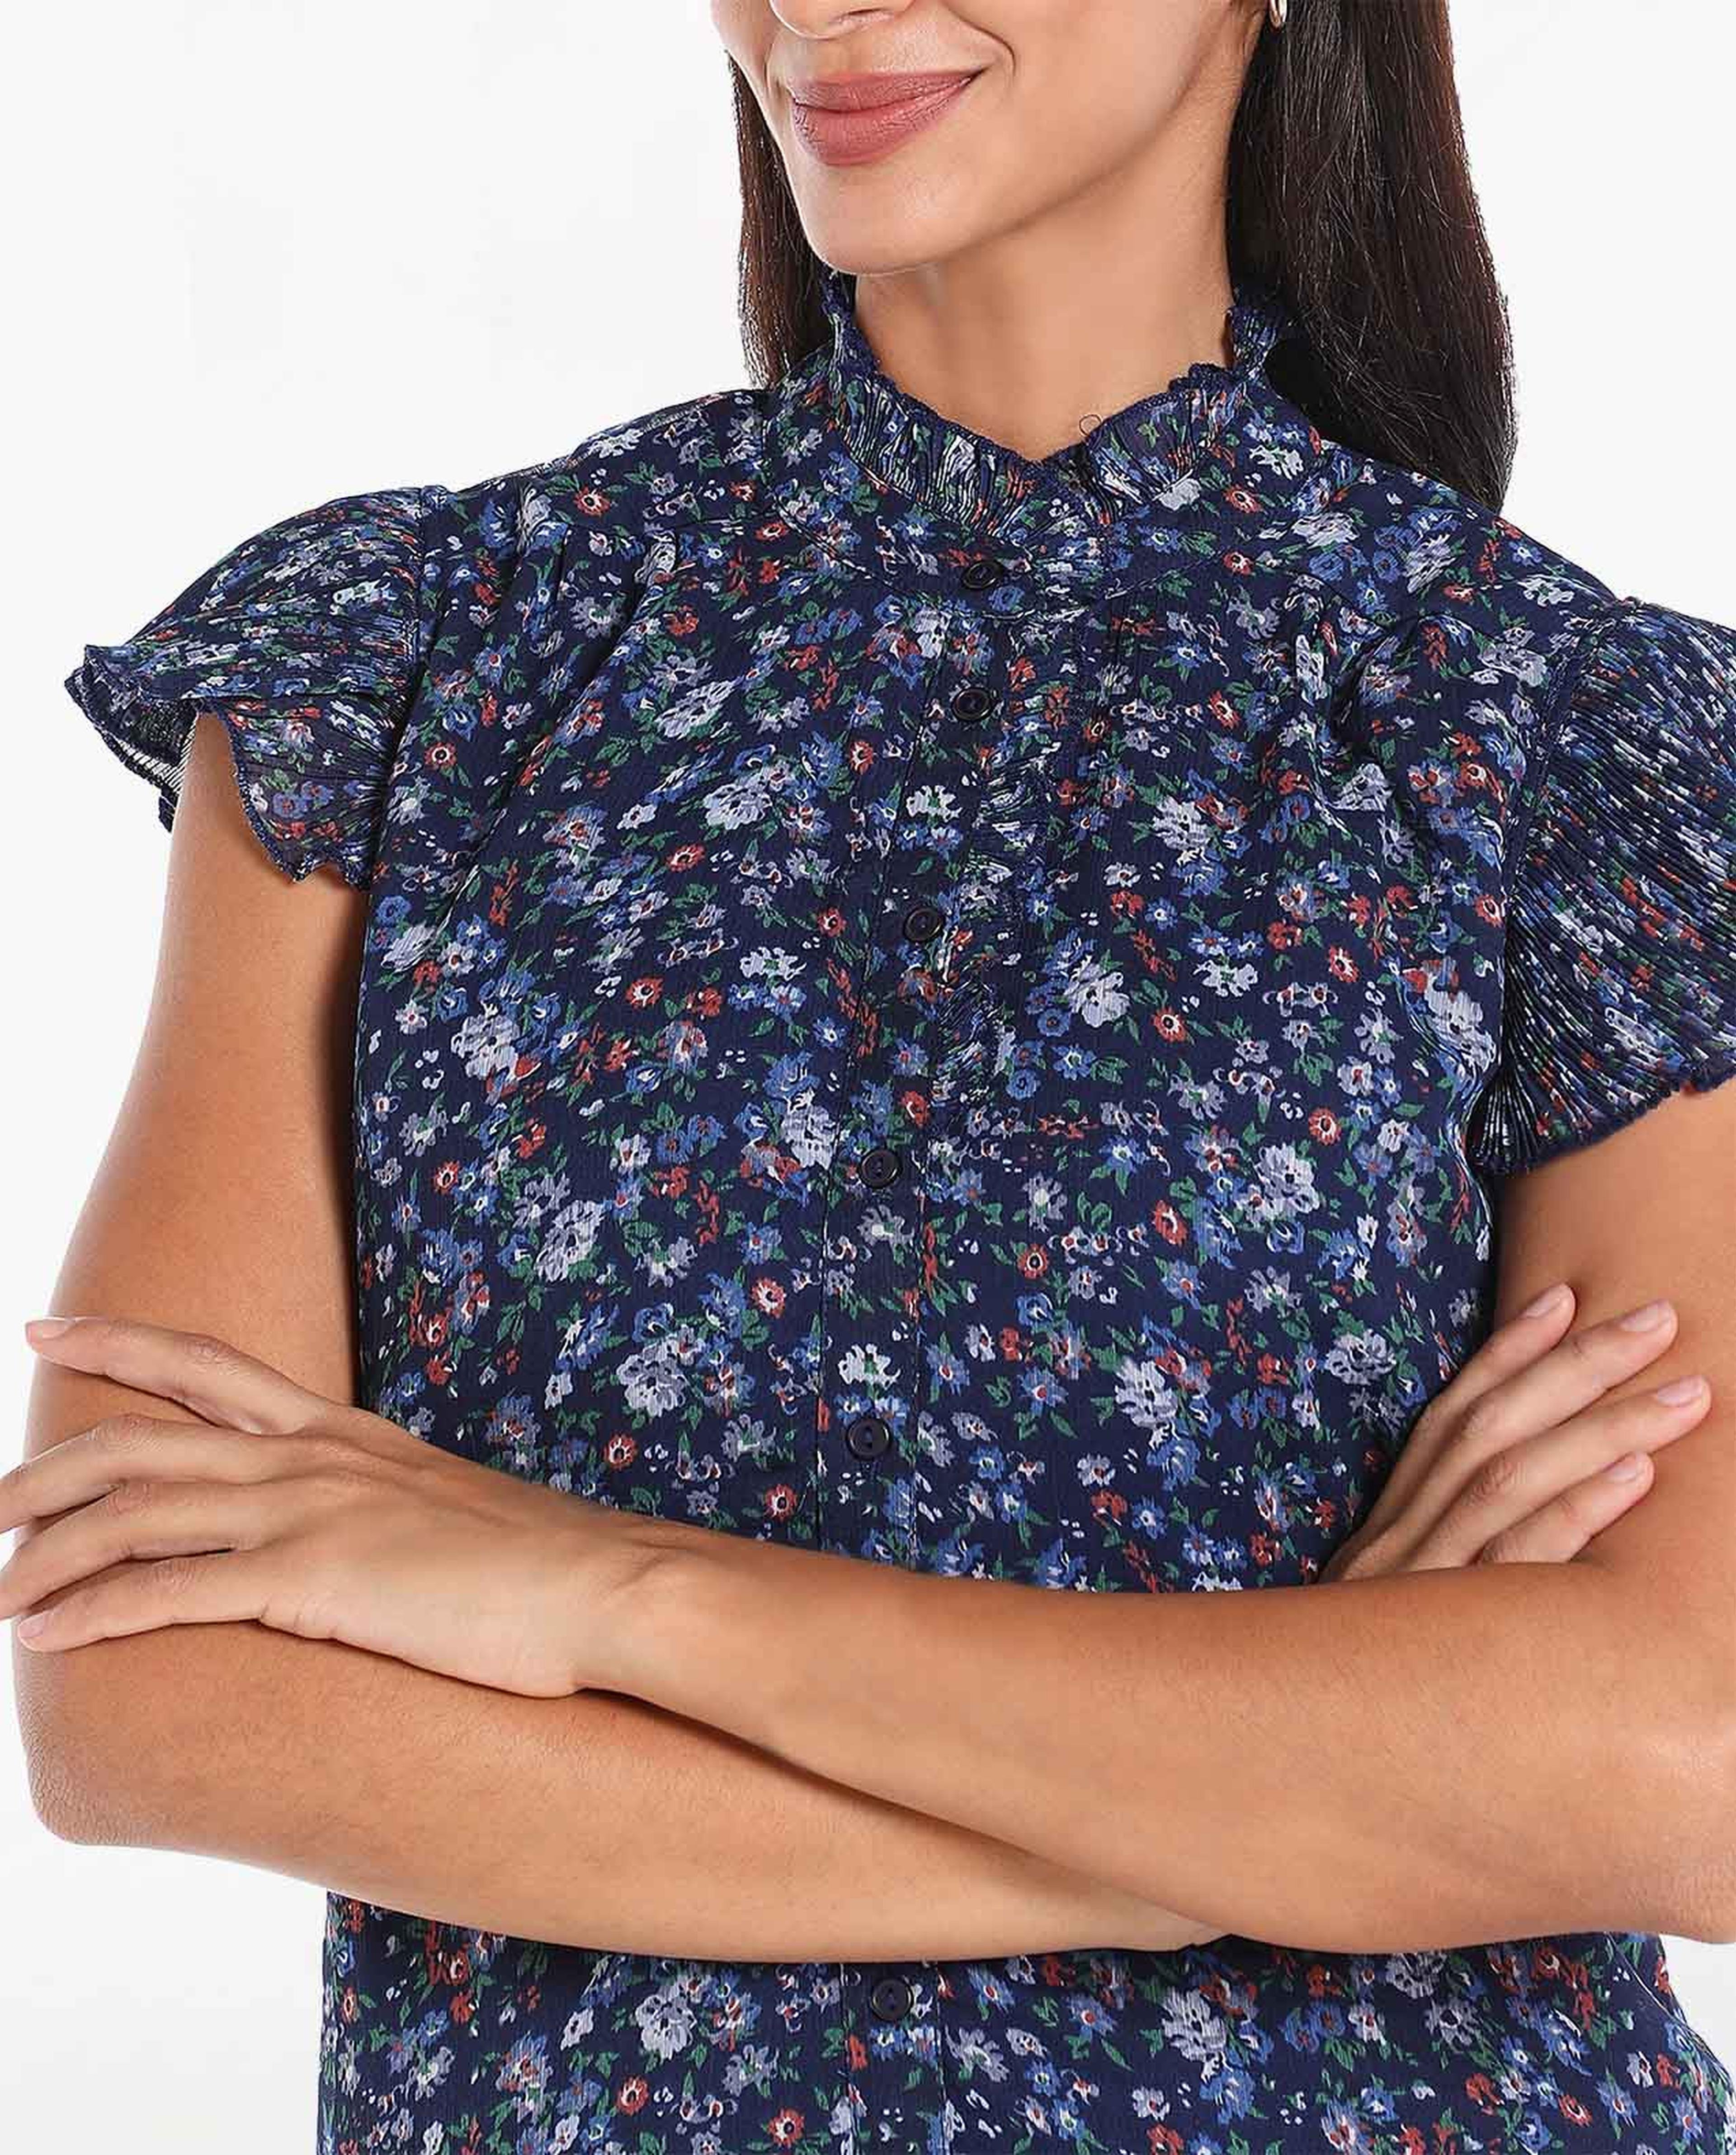 Floral Printed Top with Lettuce Neck and Cap Sleeves